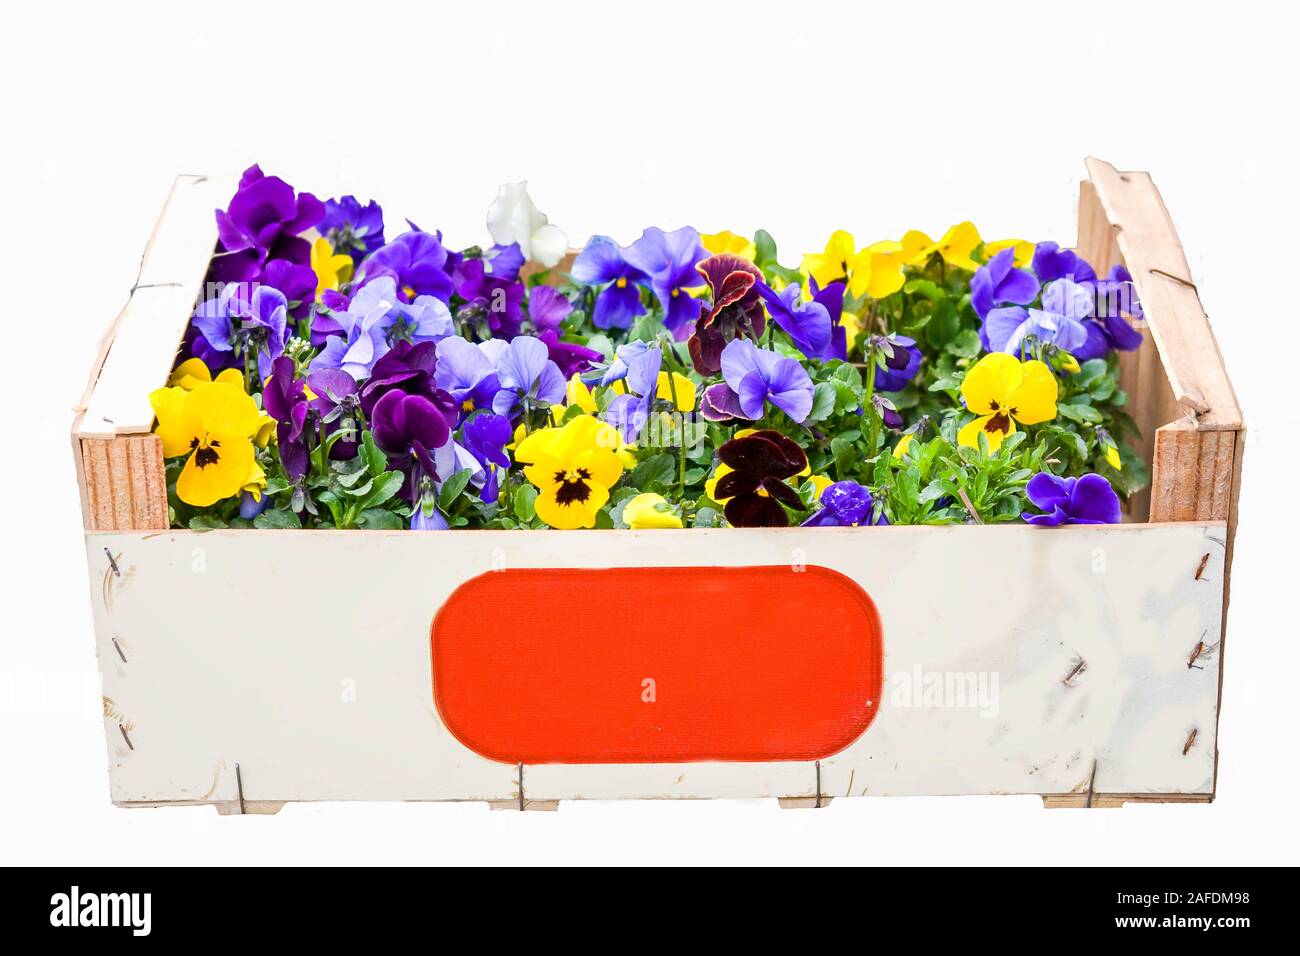 Purple and yellow pansies in a crate isolated on white Stock Photo